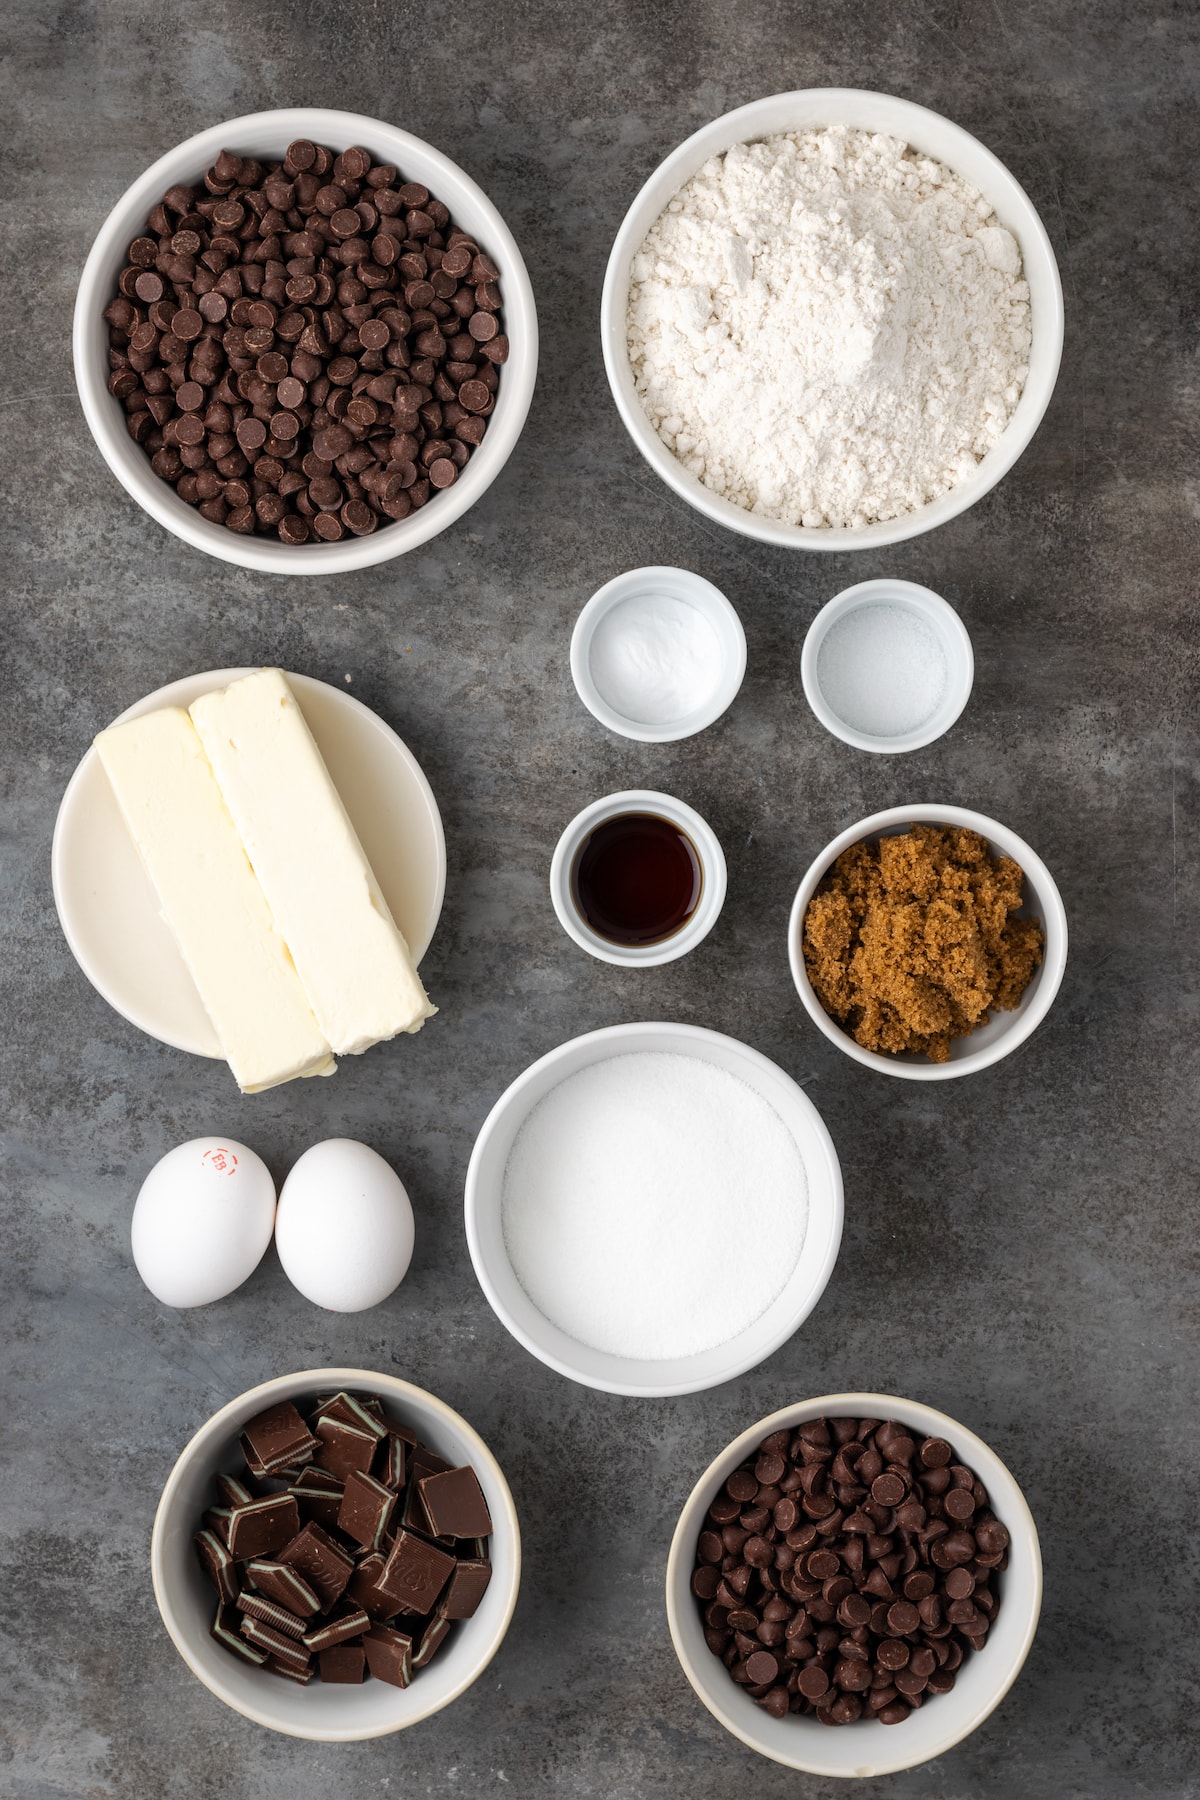 Ingredients for double chocolate mint cookies.